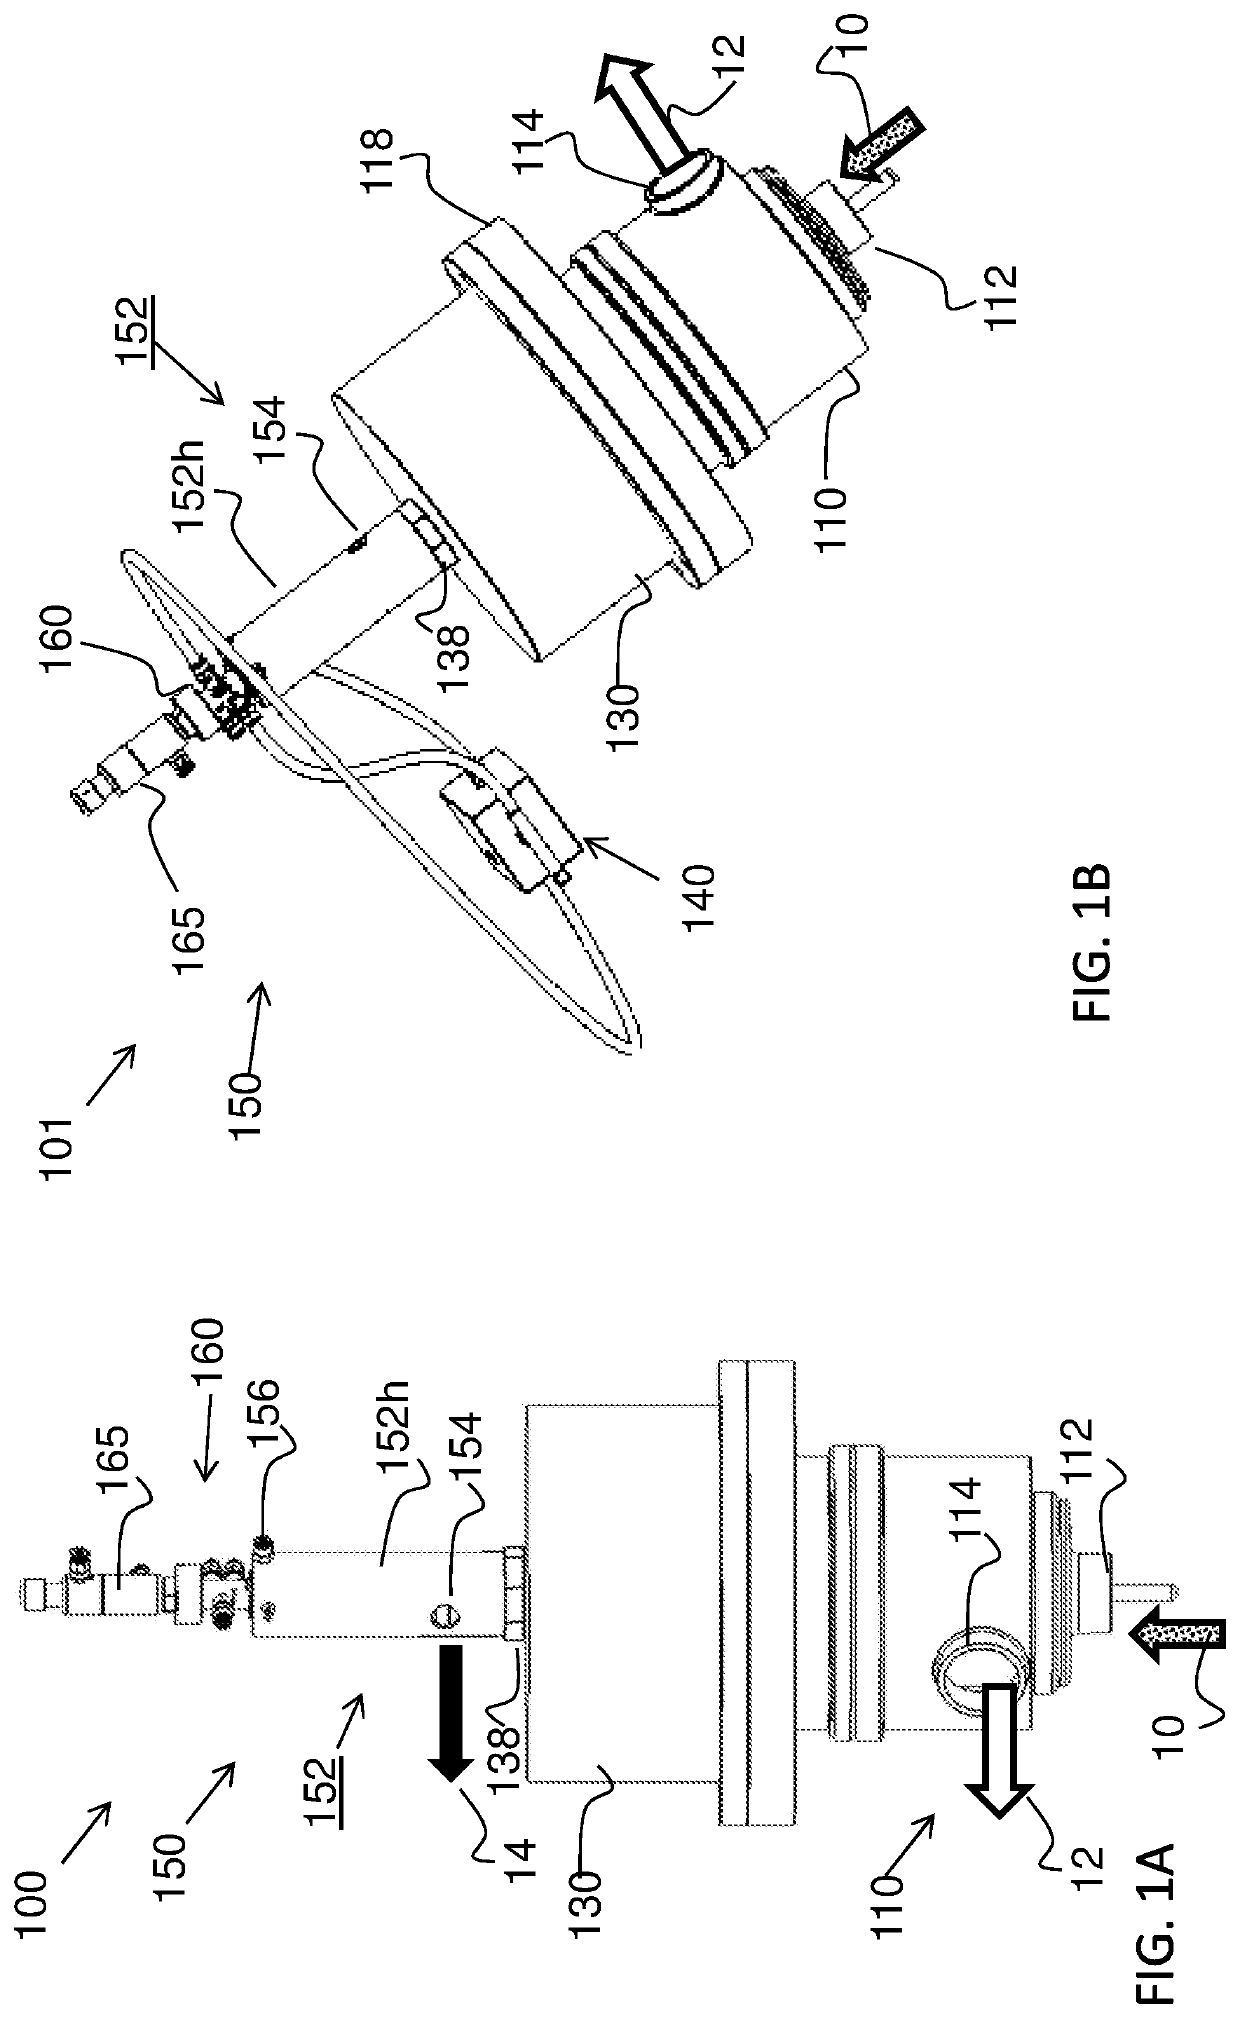 Autonomously controlled self-cleaning filter apparatus